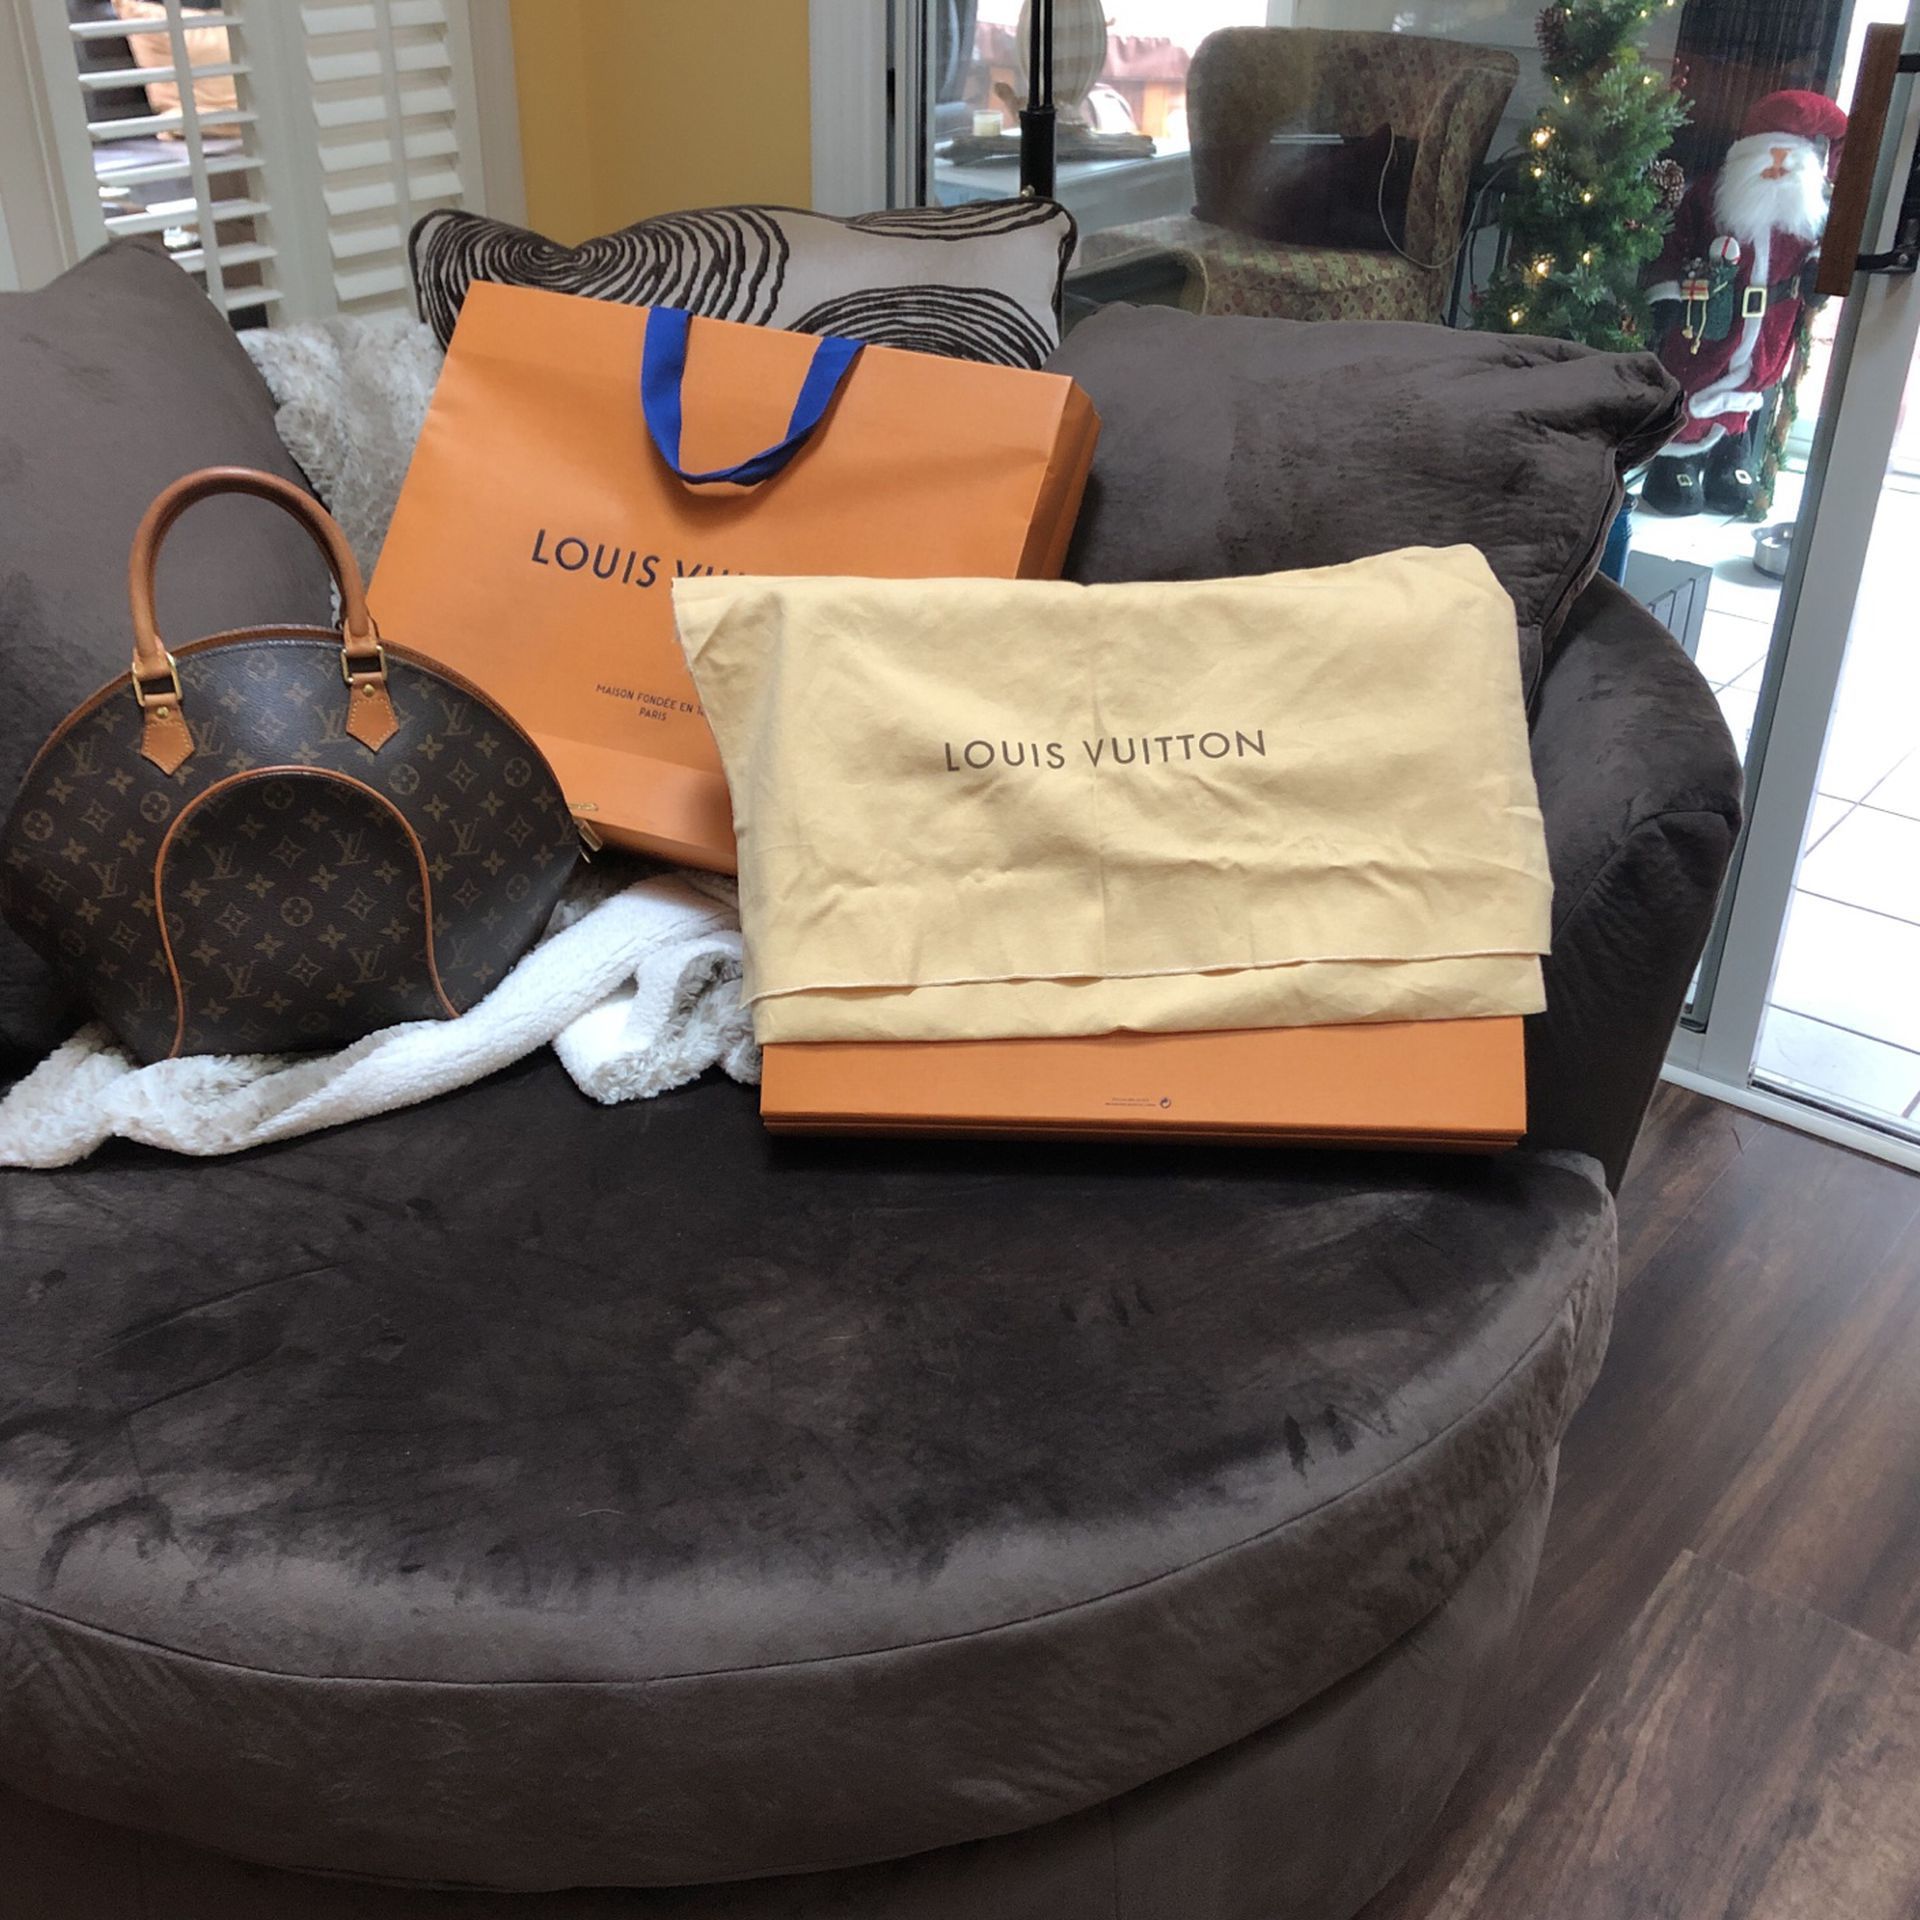 Authentic Louis Vuitton Handbag With Cloth Bag, Box And Store Bag.